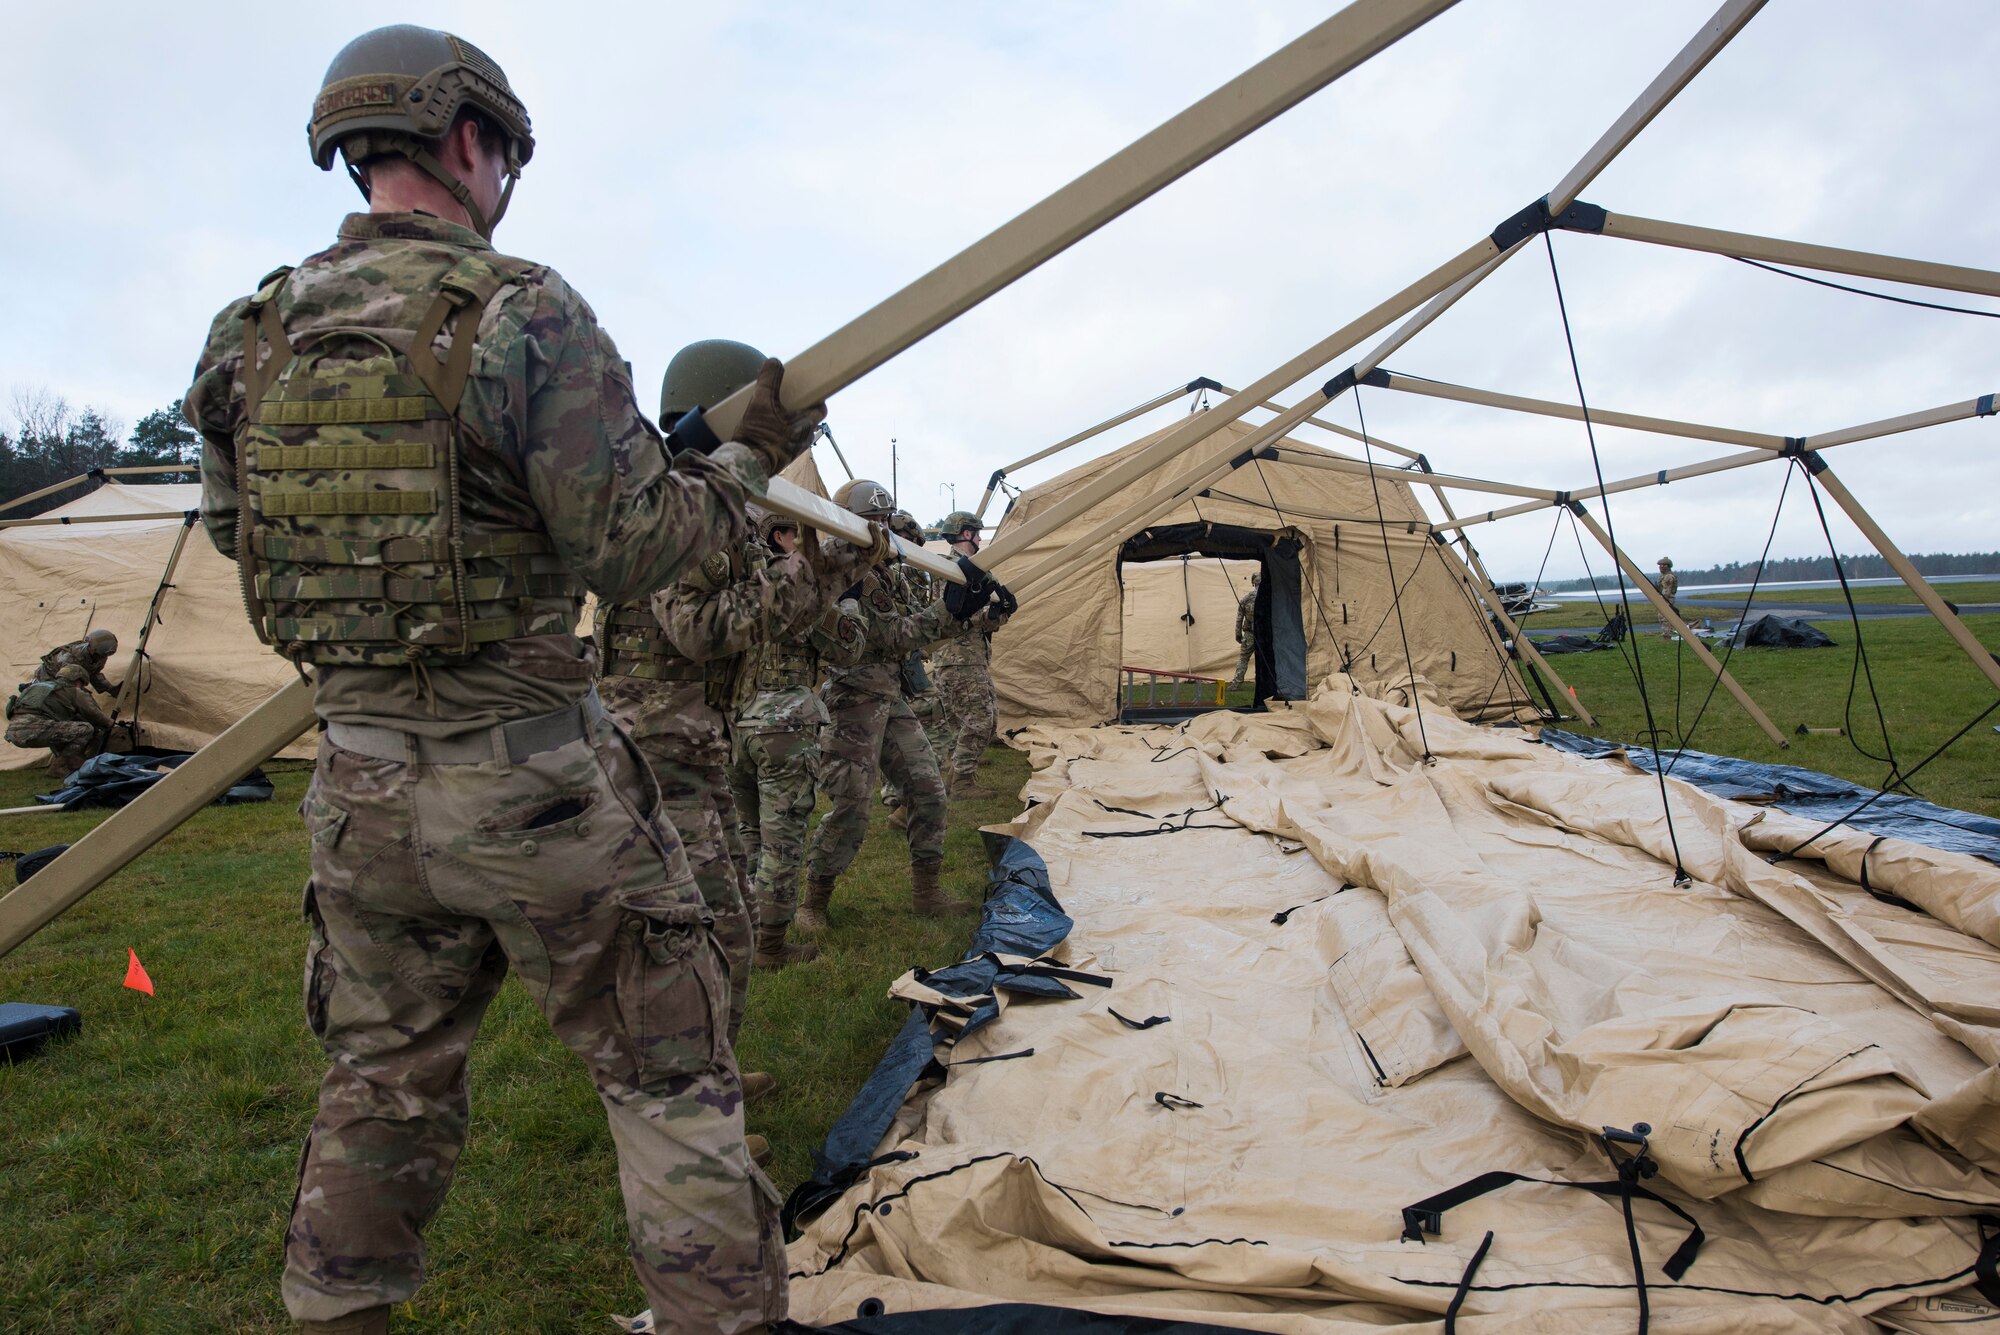 U.S. Airmen assigned to the 435th Contingency Response Group assemble the frame of an expeditionary tent during exercise Agile Wolf 21-01